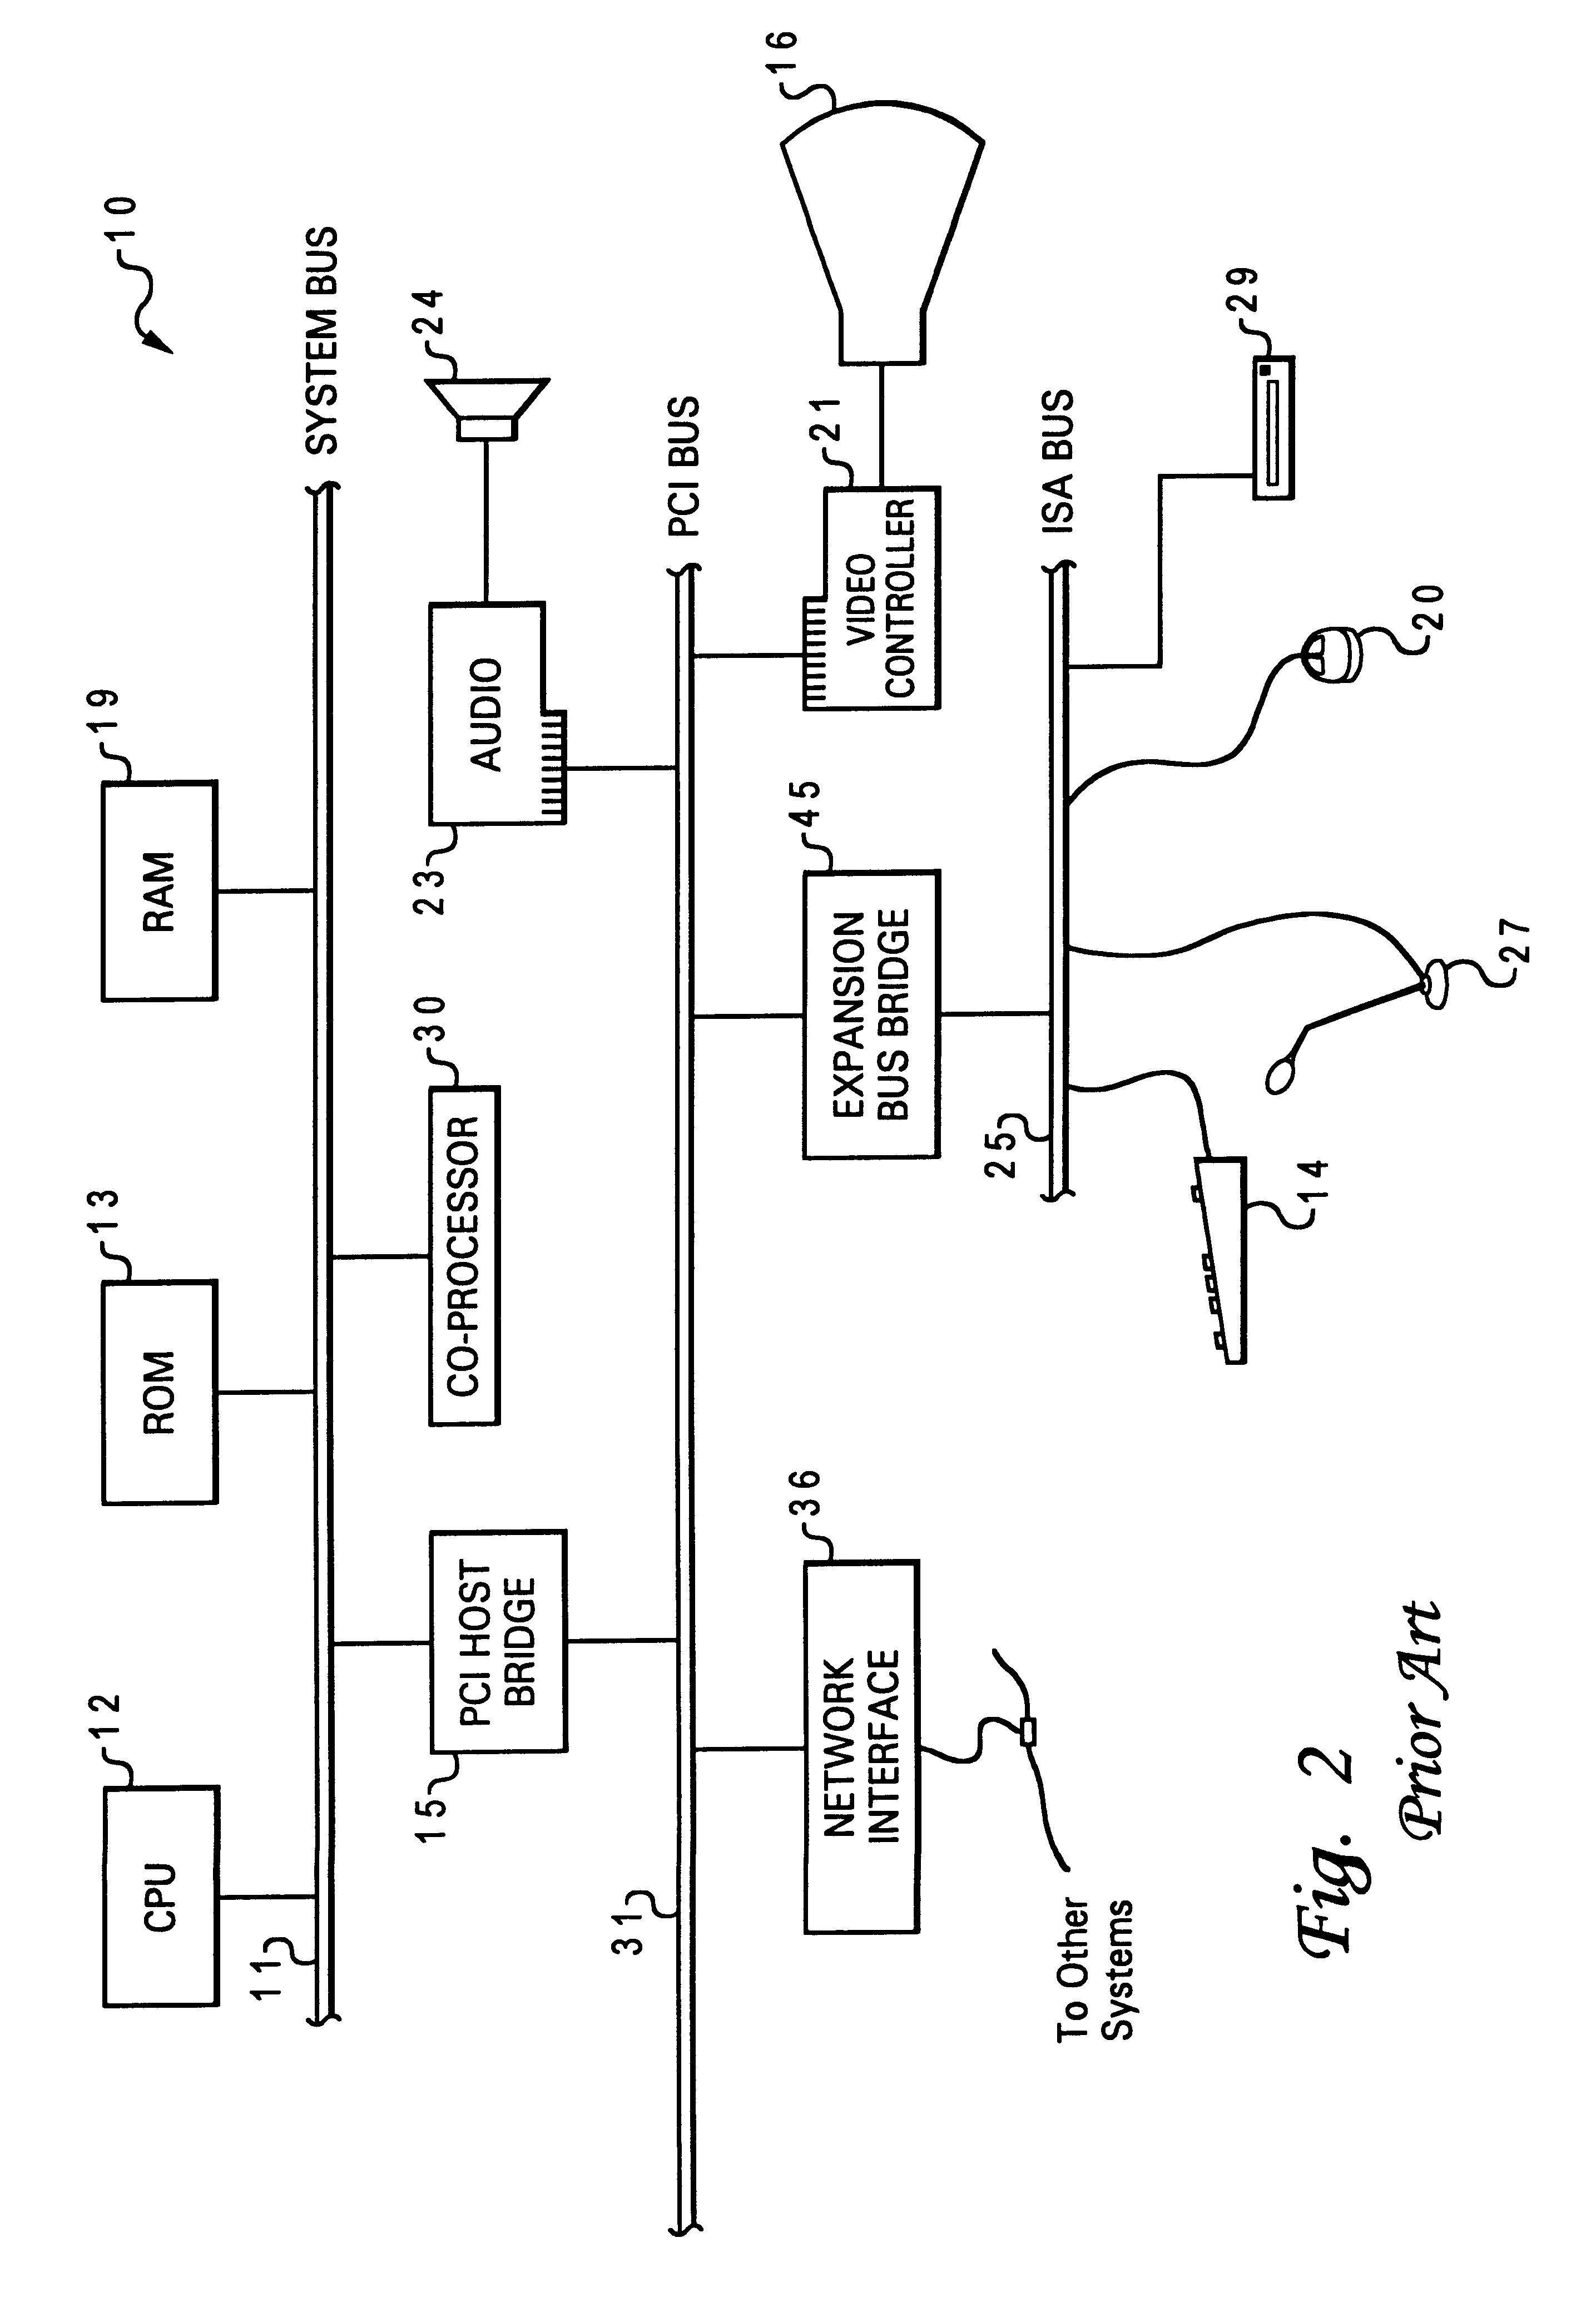 Method for extracting hyperlinks from a display document and automatically retrieving and displaying multiple subordinate documents of the display document